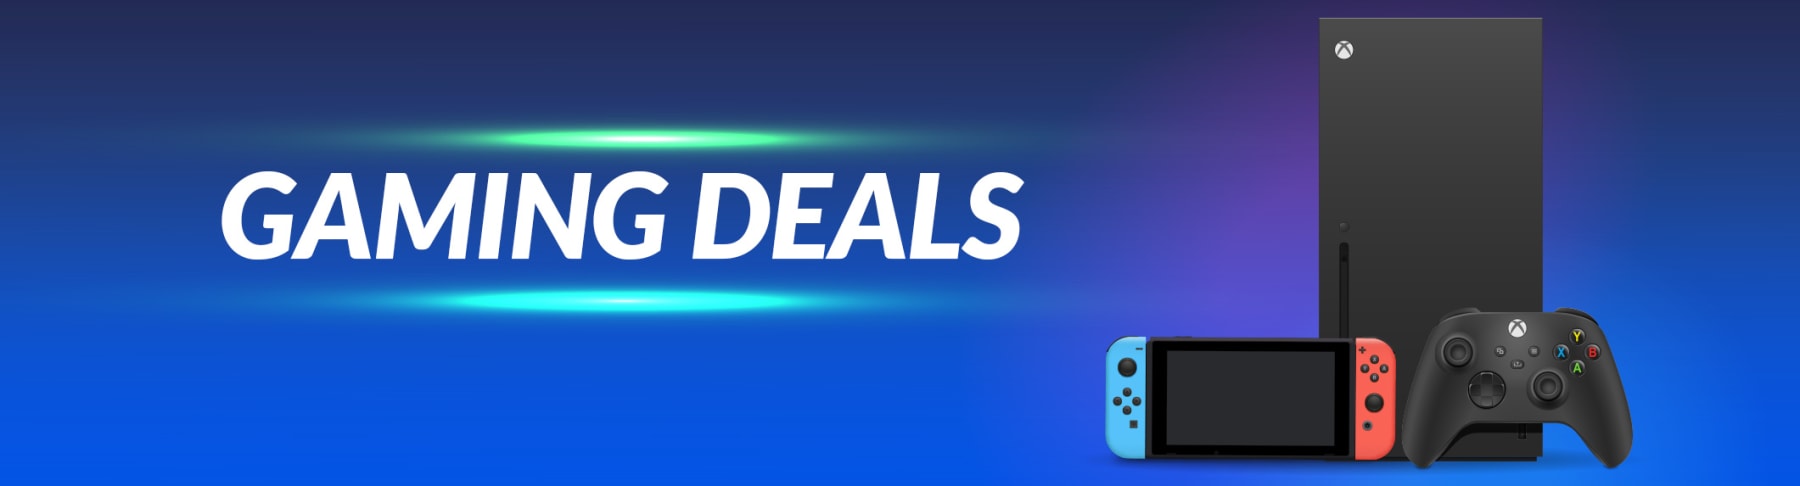 gaming devices next to text reading Gaming Deals